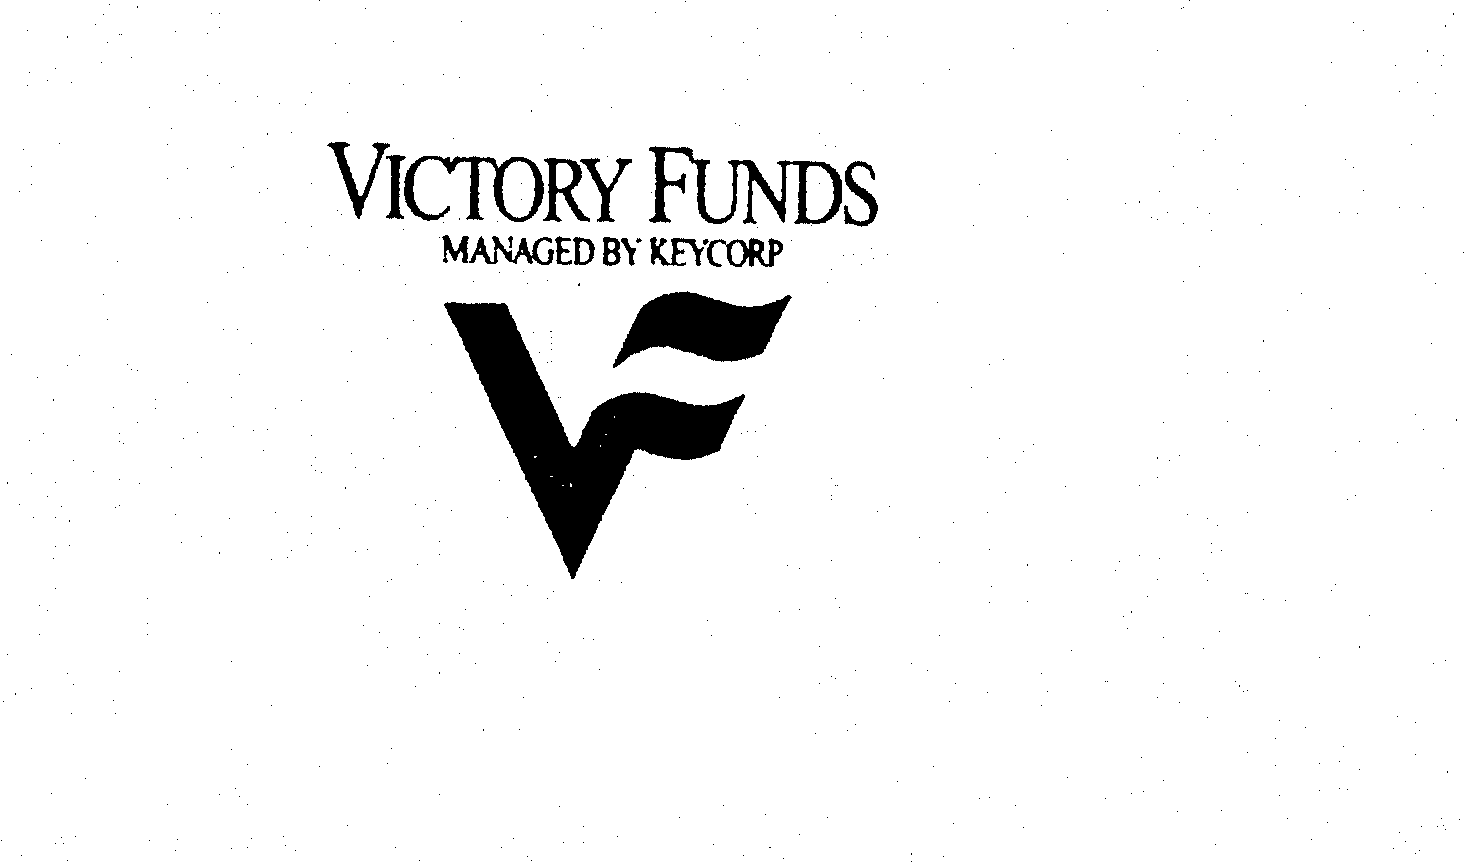 Trademark Logo VF VICTORY FUNDS MANAGED BY KEYCORP